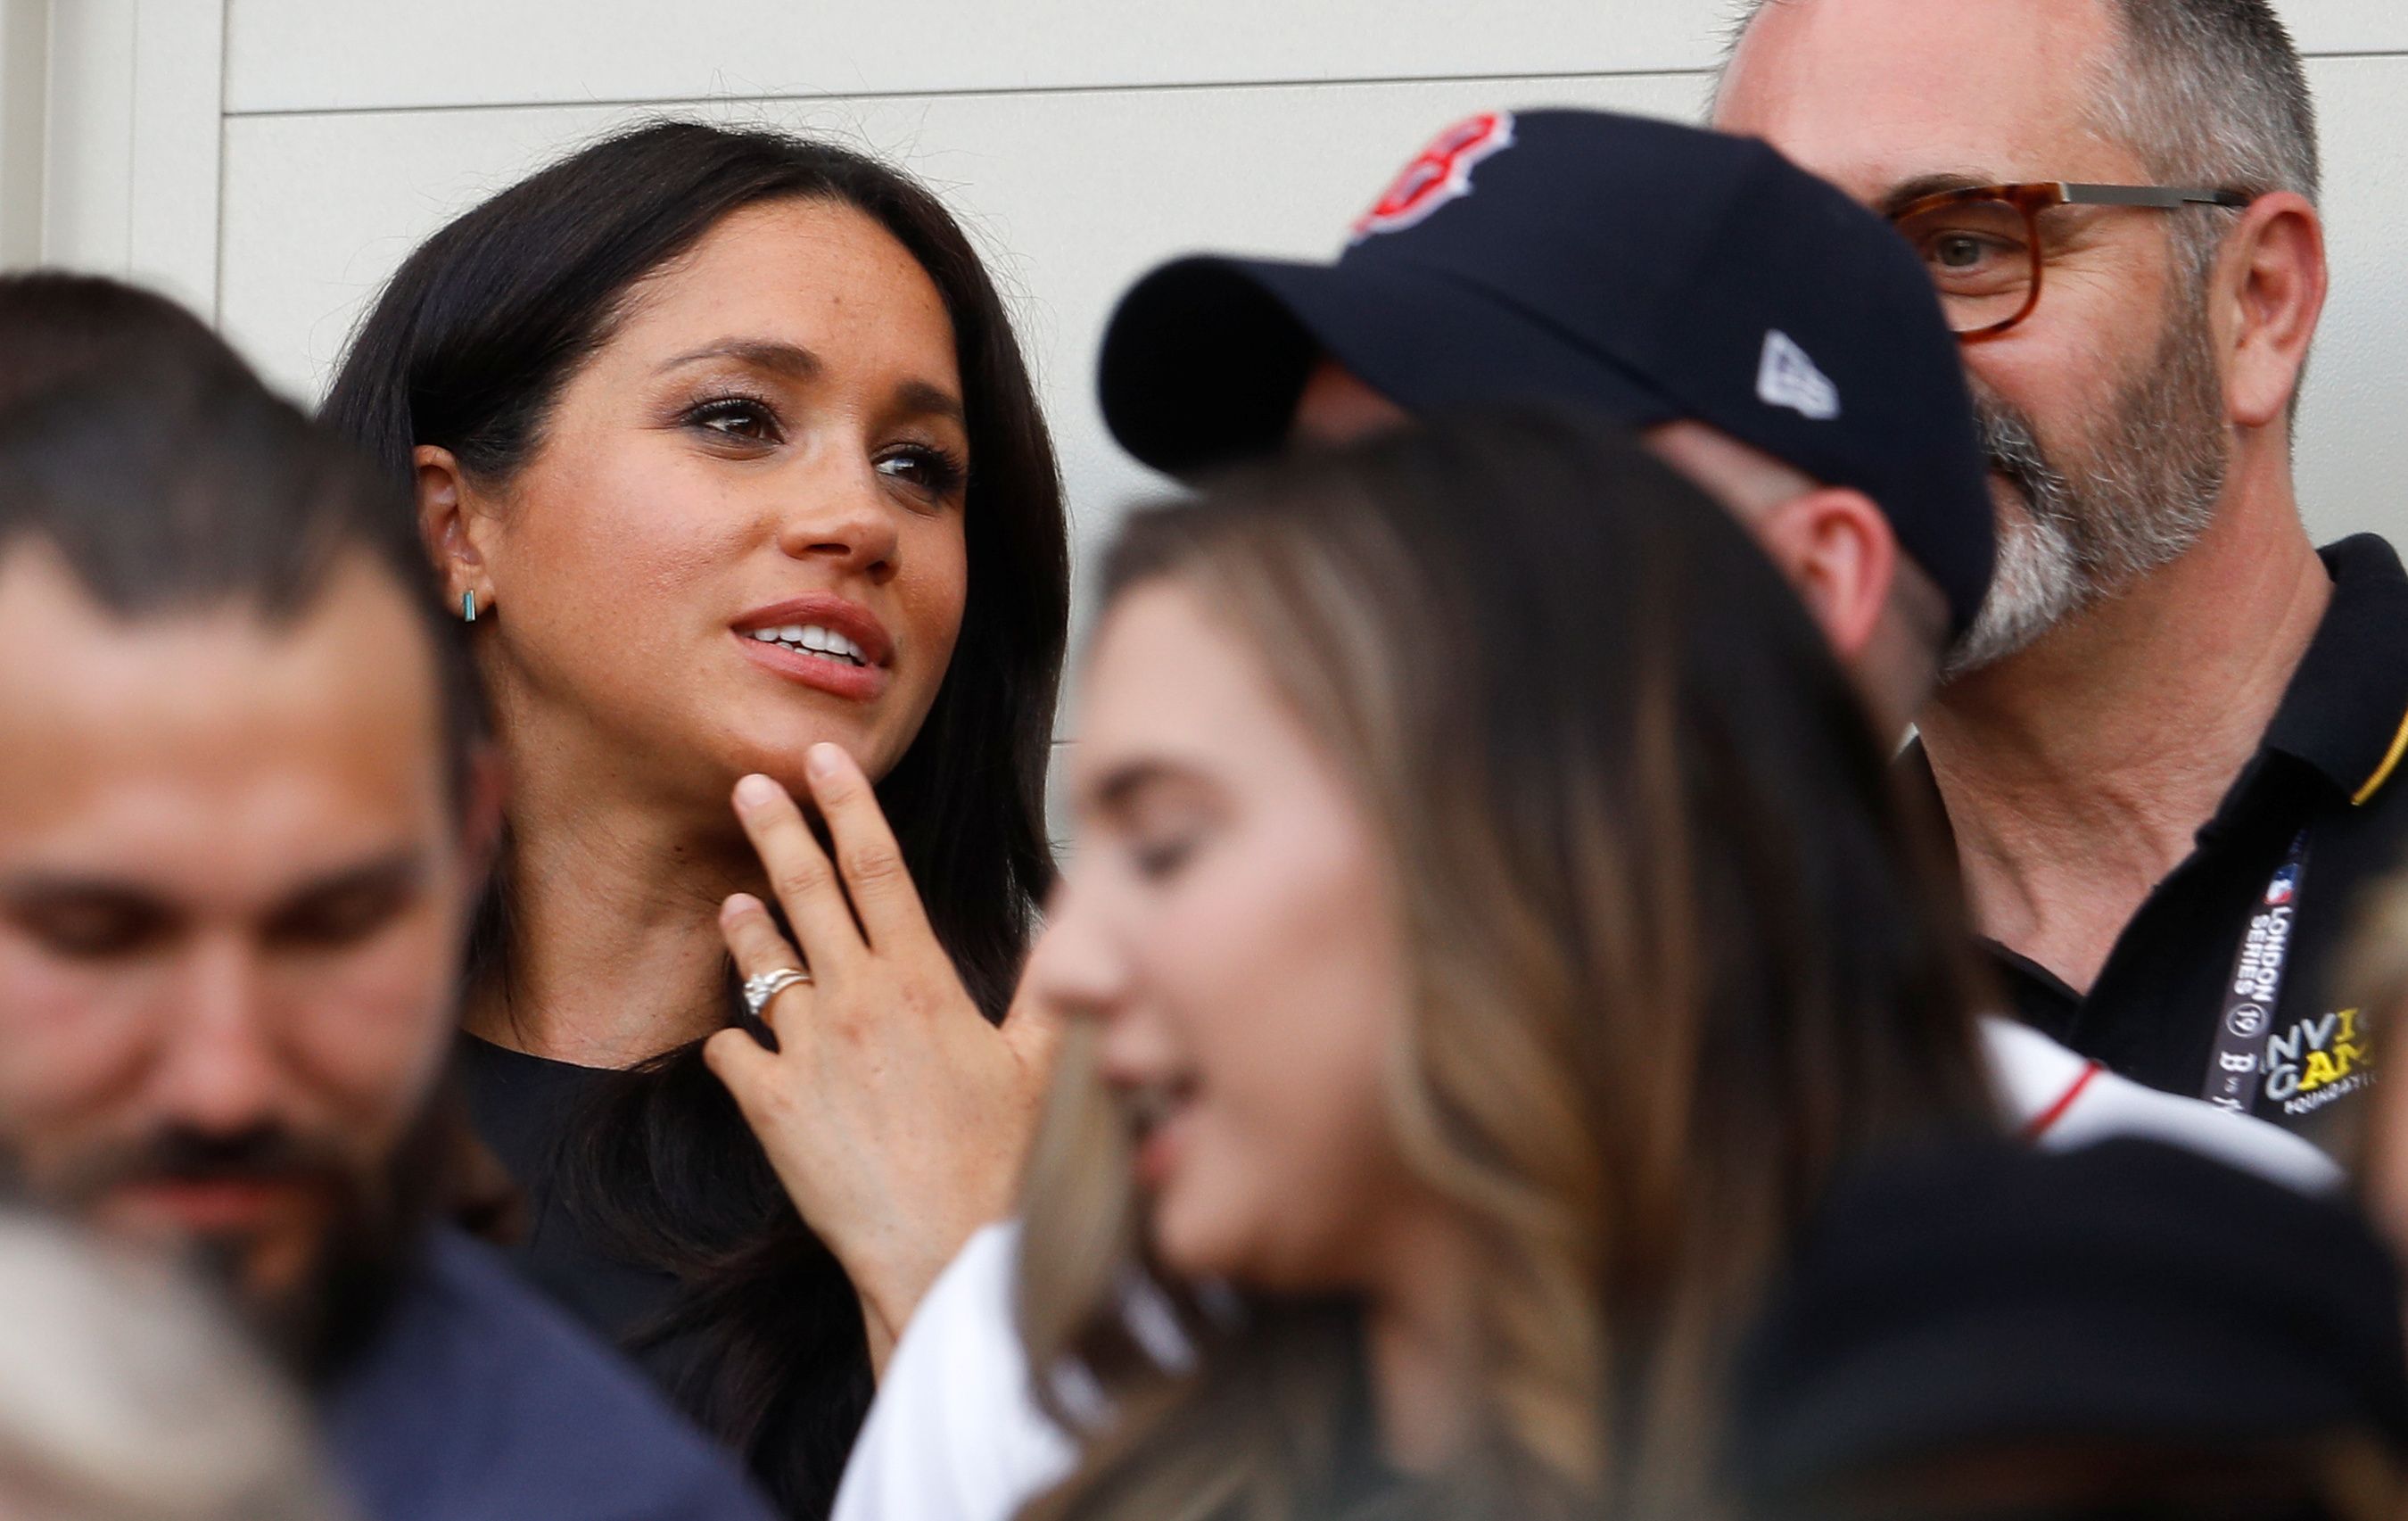 Meghan Markle Attends the Boston Red Sox vs New York Yankees